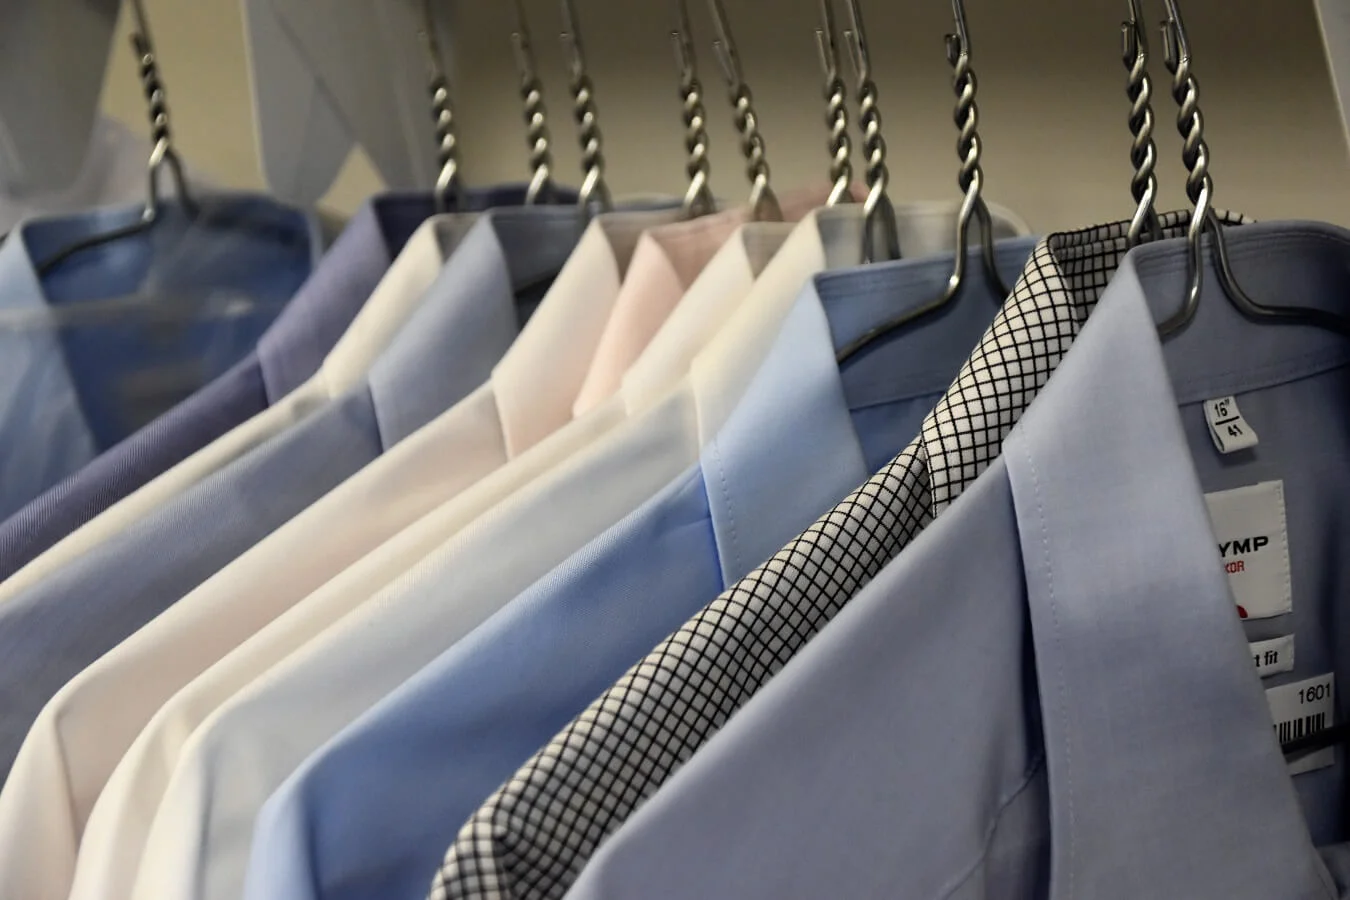 Getting your clothes professionally dry cleaned can keep them looking fresh and new, while saving you time on laundry.